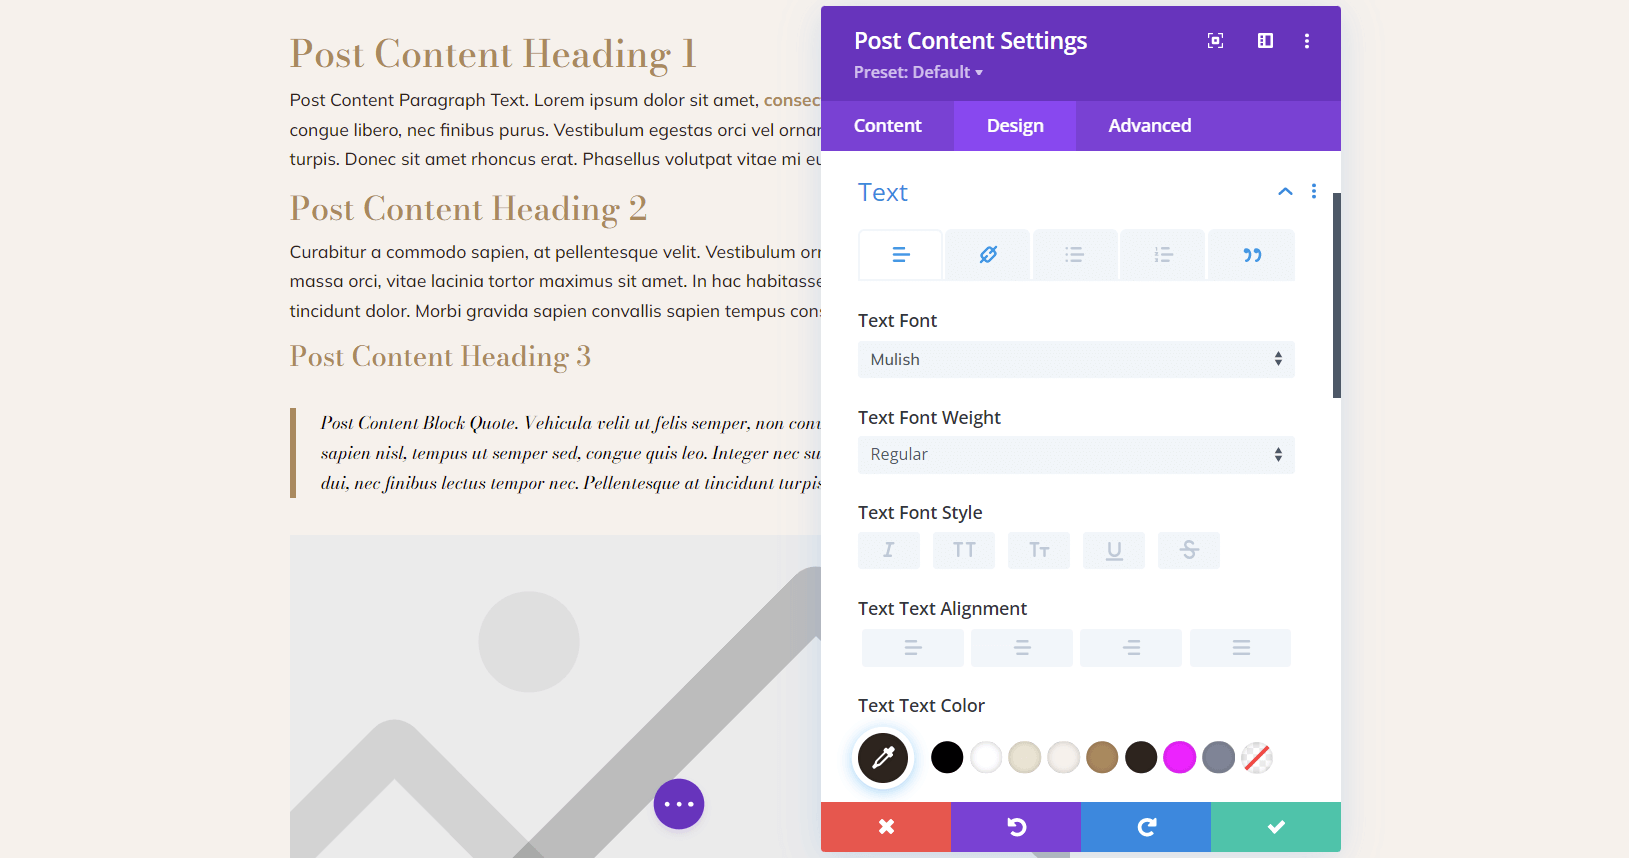 Edit or update the Post Content to suit your needs and branding